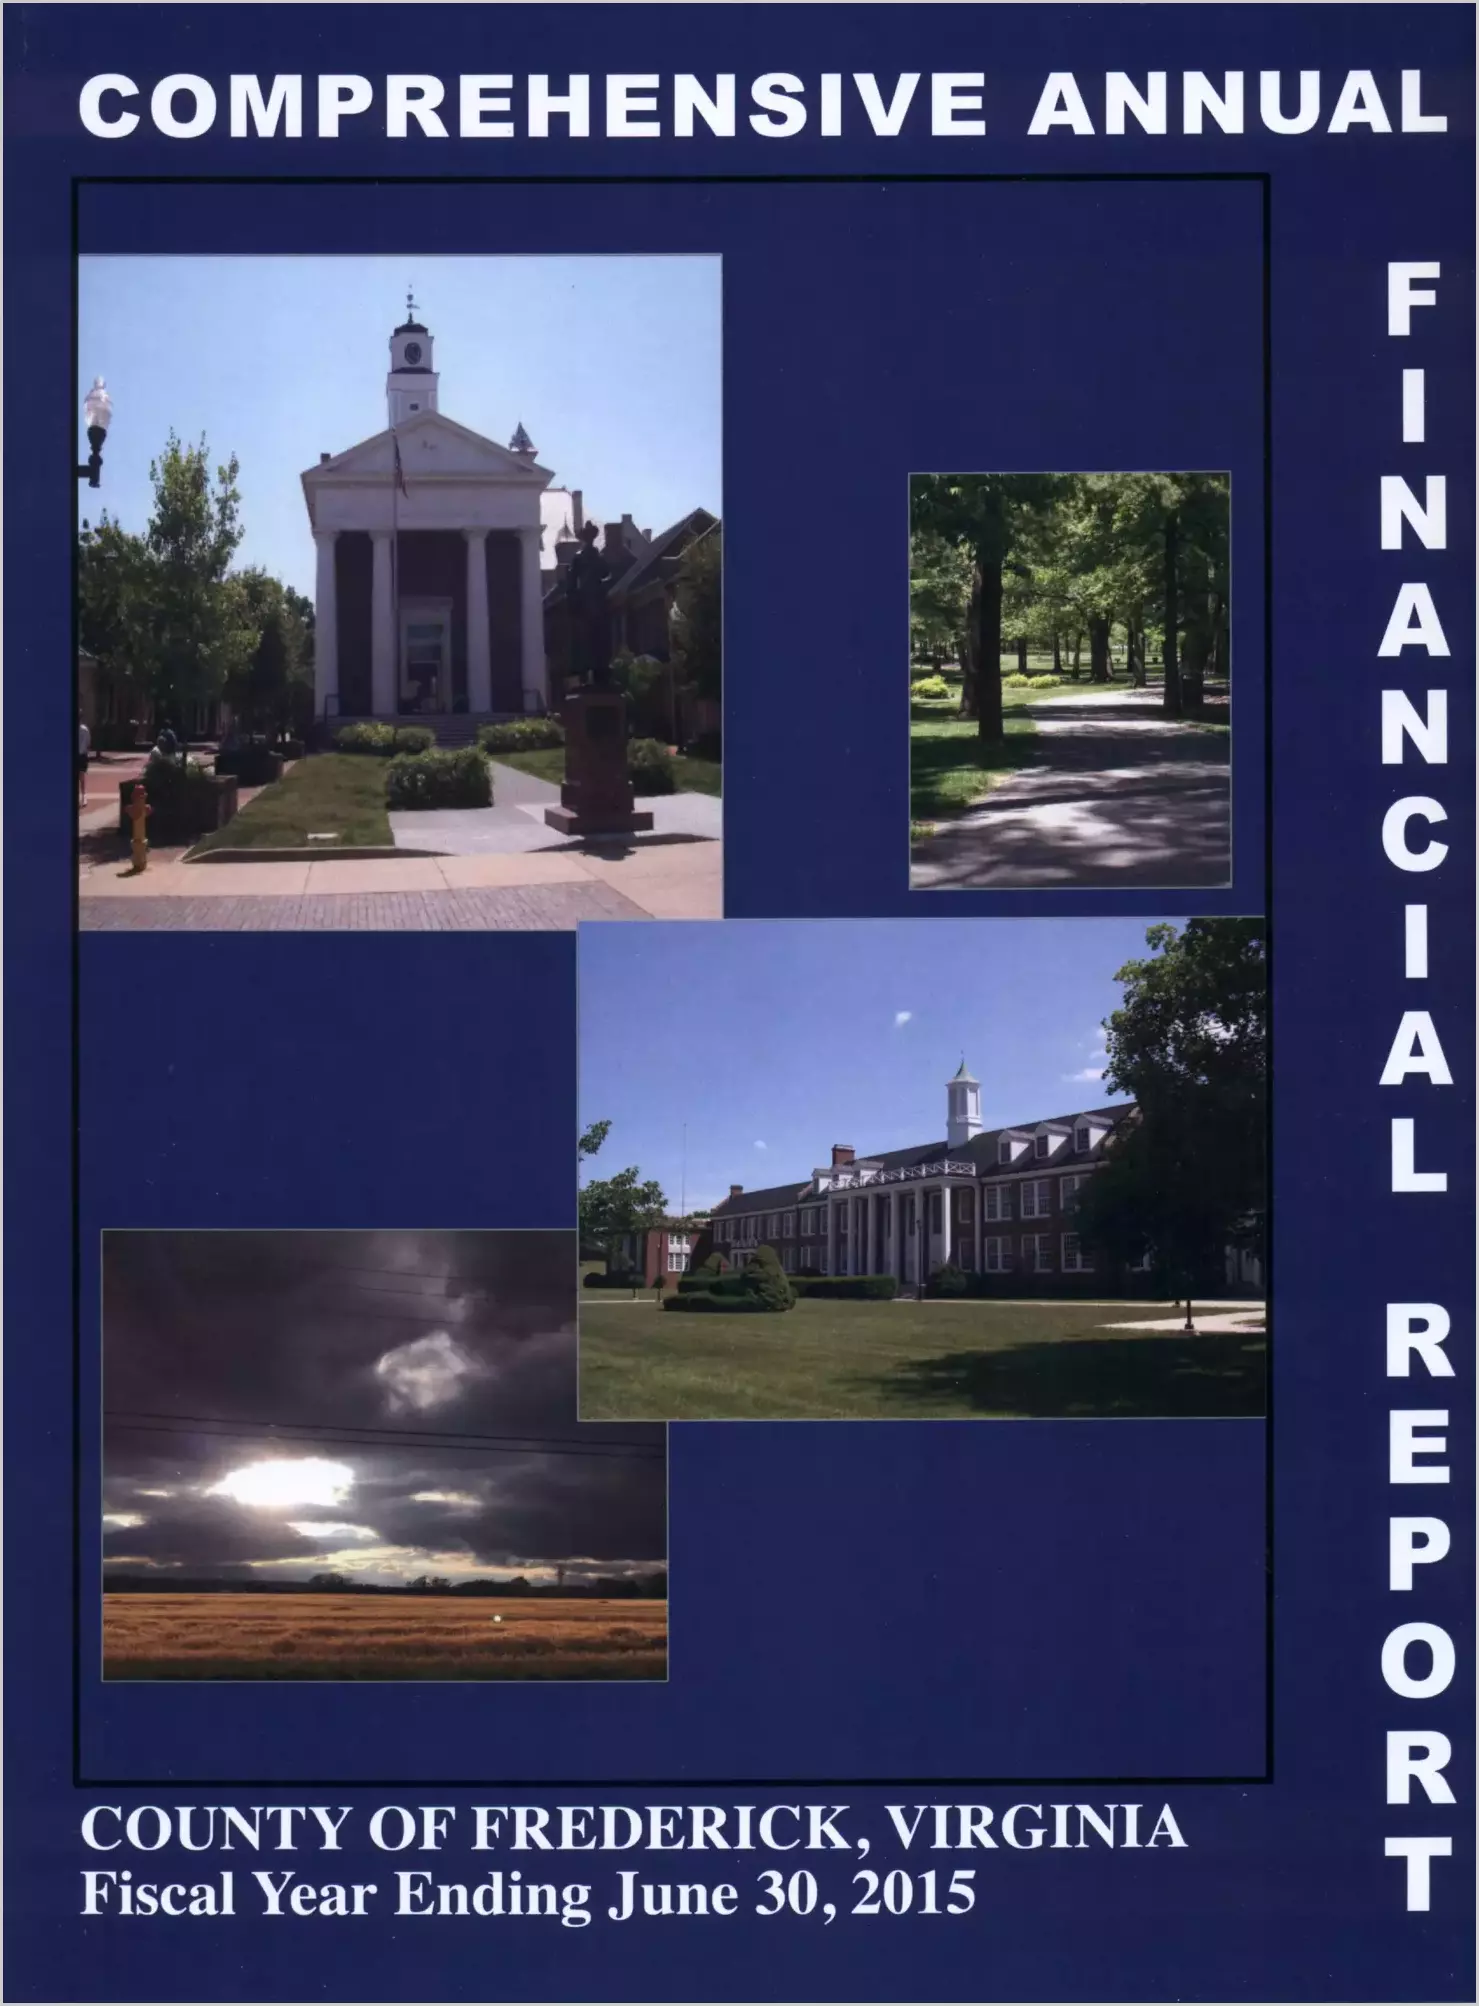 2015 Annual Financial Report for County of Frederick